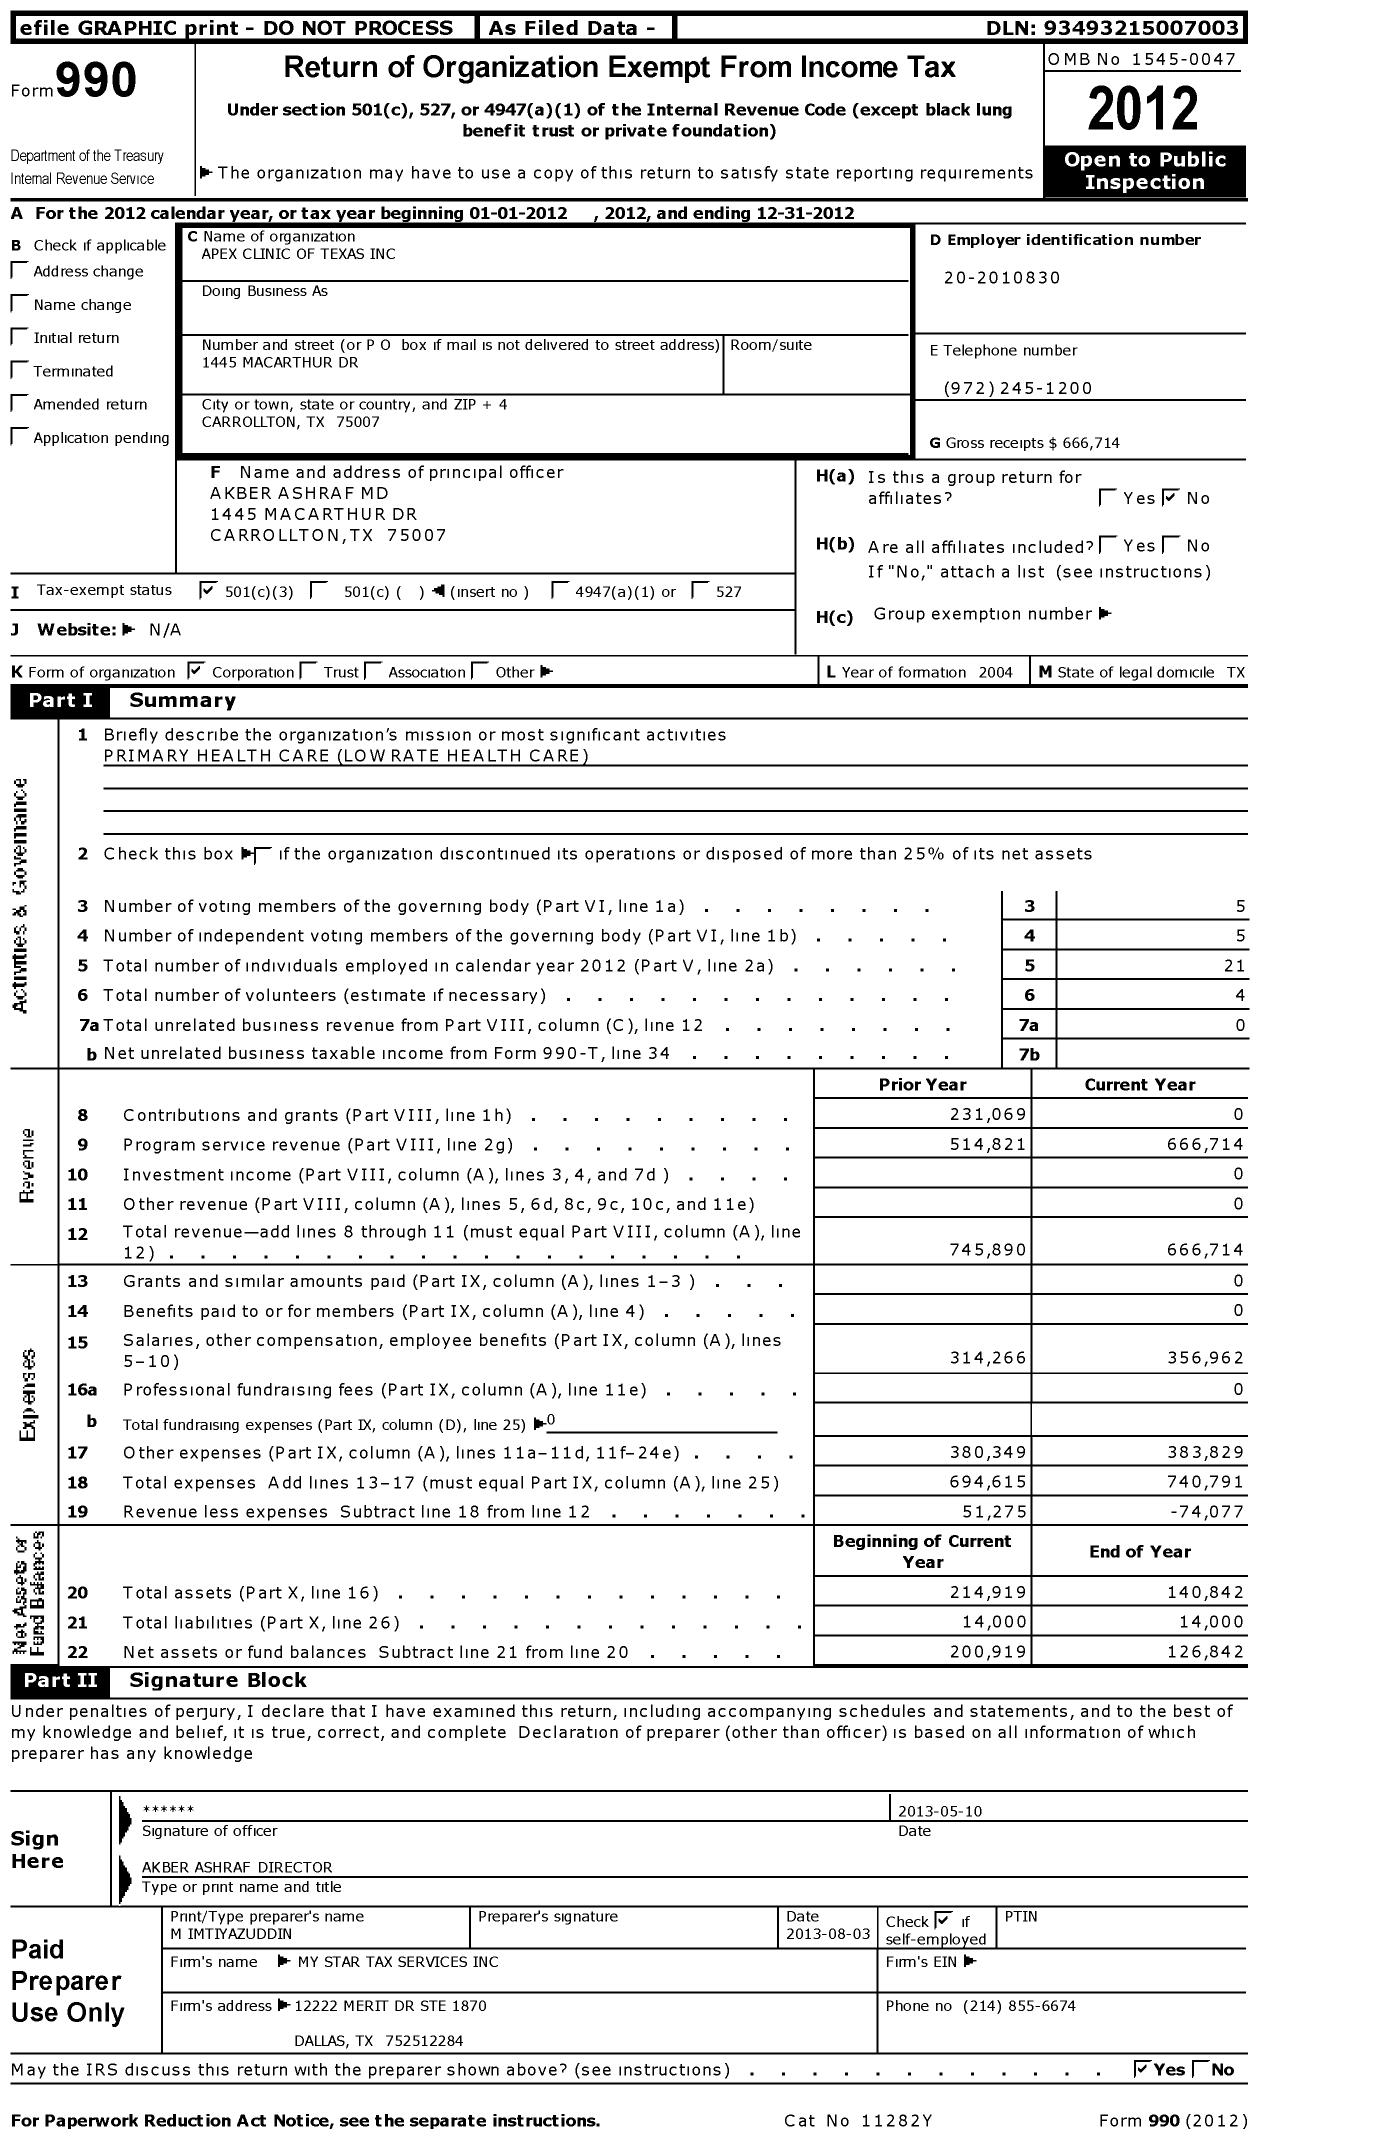 Image of first page of 2012 Form 990 for Apex Clinic of Texas